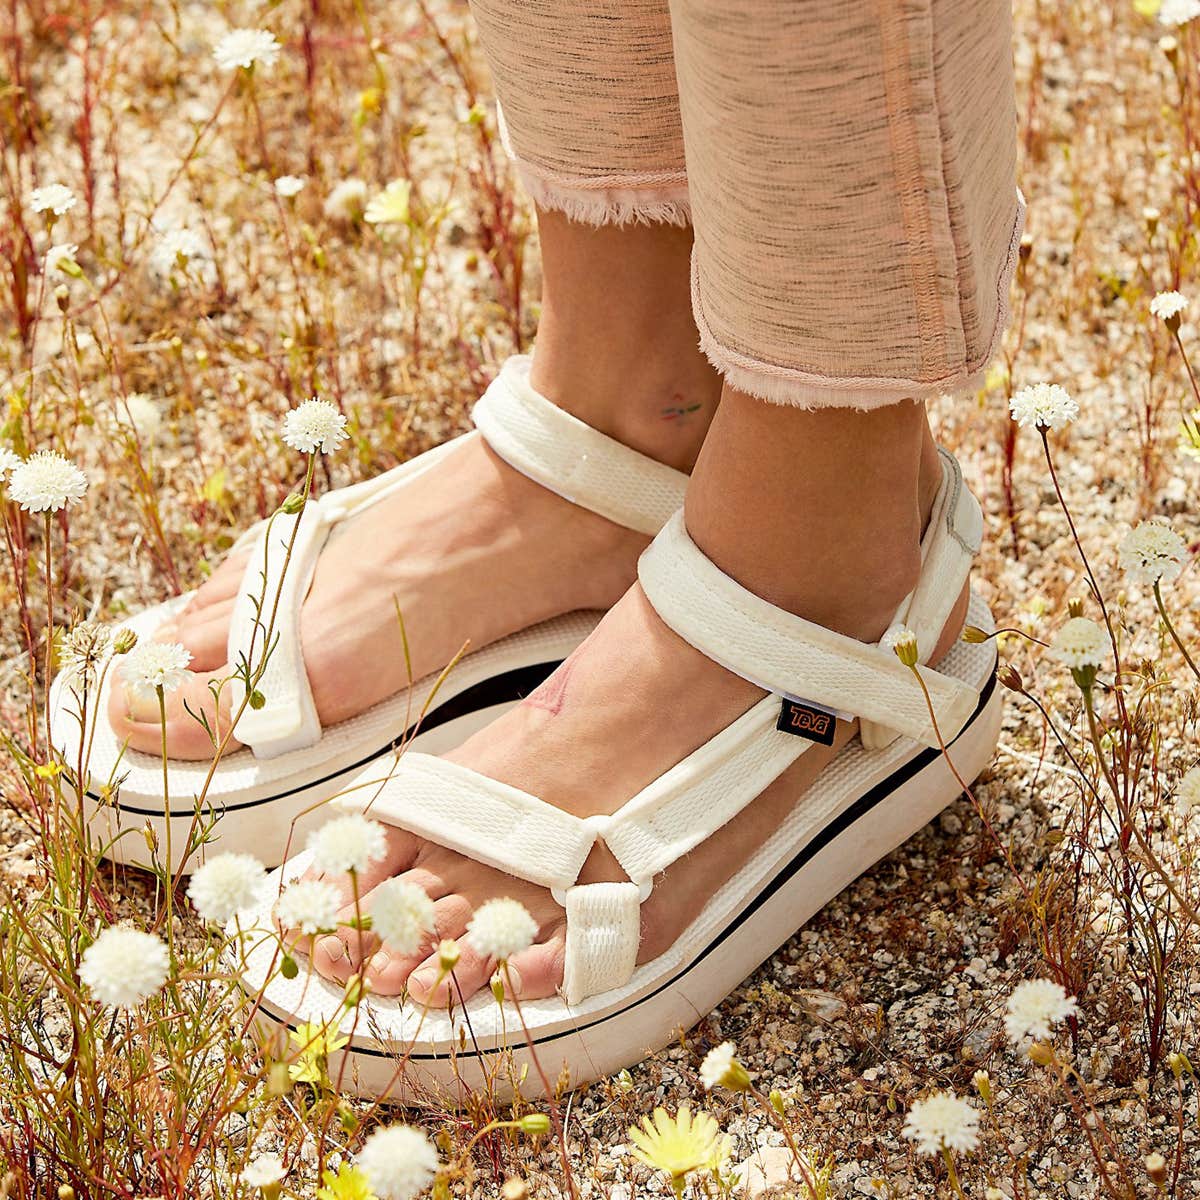 How To Clean White Tevas At Any Heel Height, White Sandals Are Summers Hot Trend